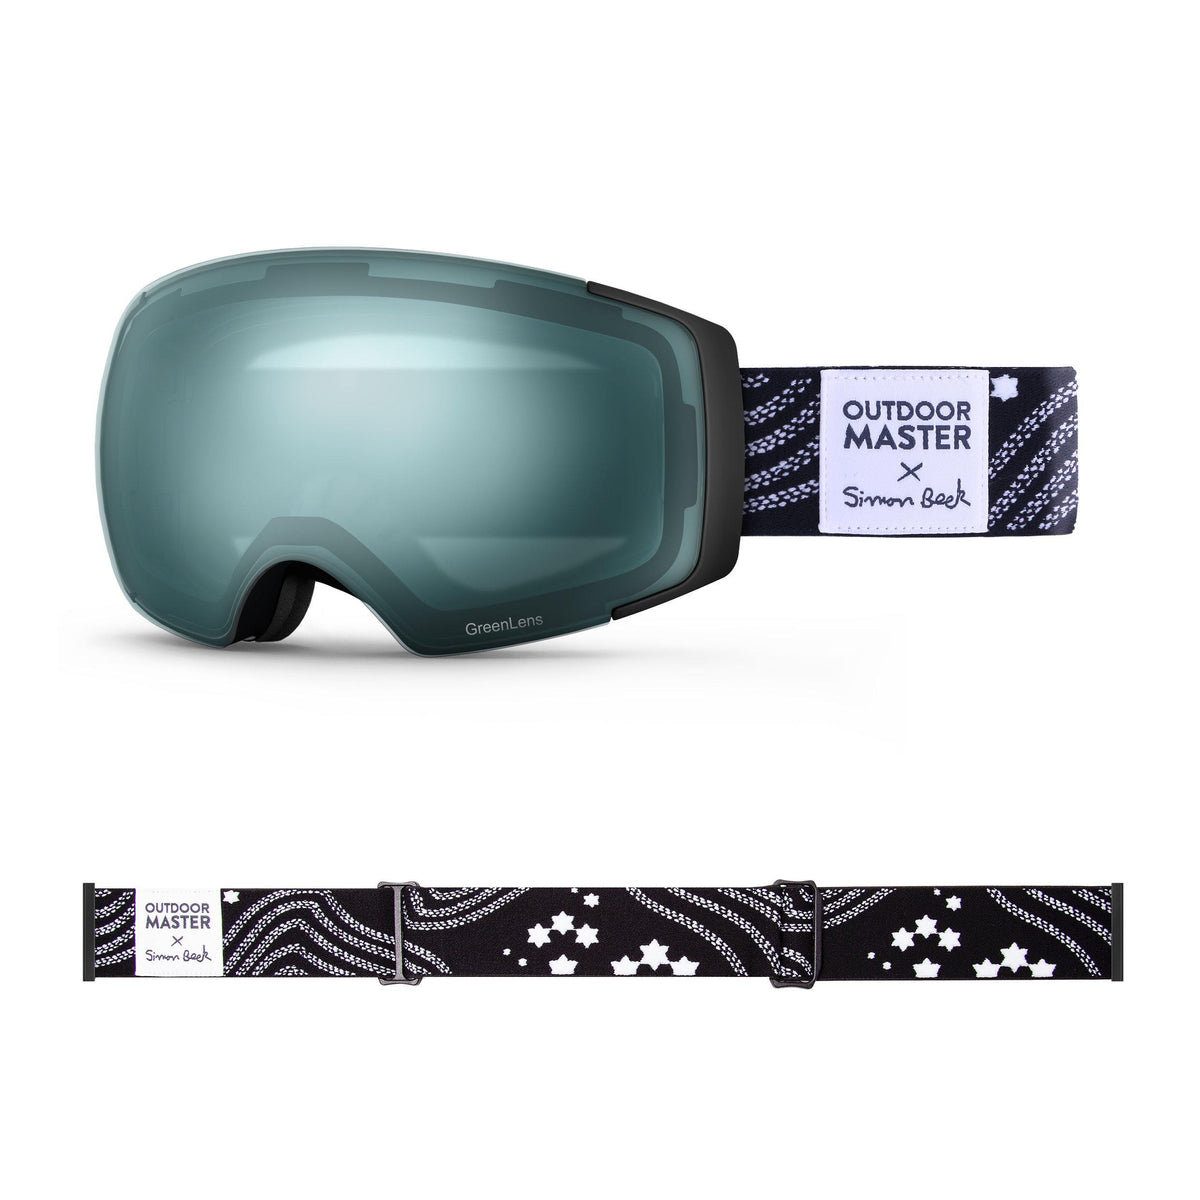 OutdoorMaster x Simon Beck Ski Goggles Pro Series - Snowshoeing Art Limited Edition OutdoorMaster GreenLens VLT 20% TAC Green Polarized Star Road-Black